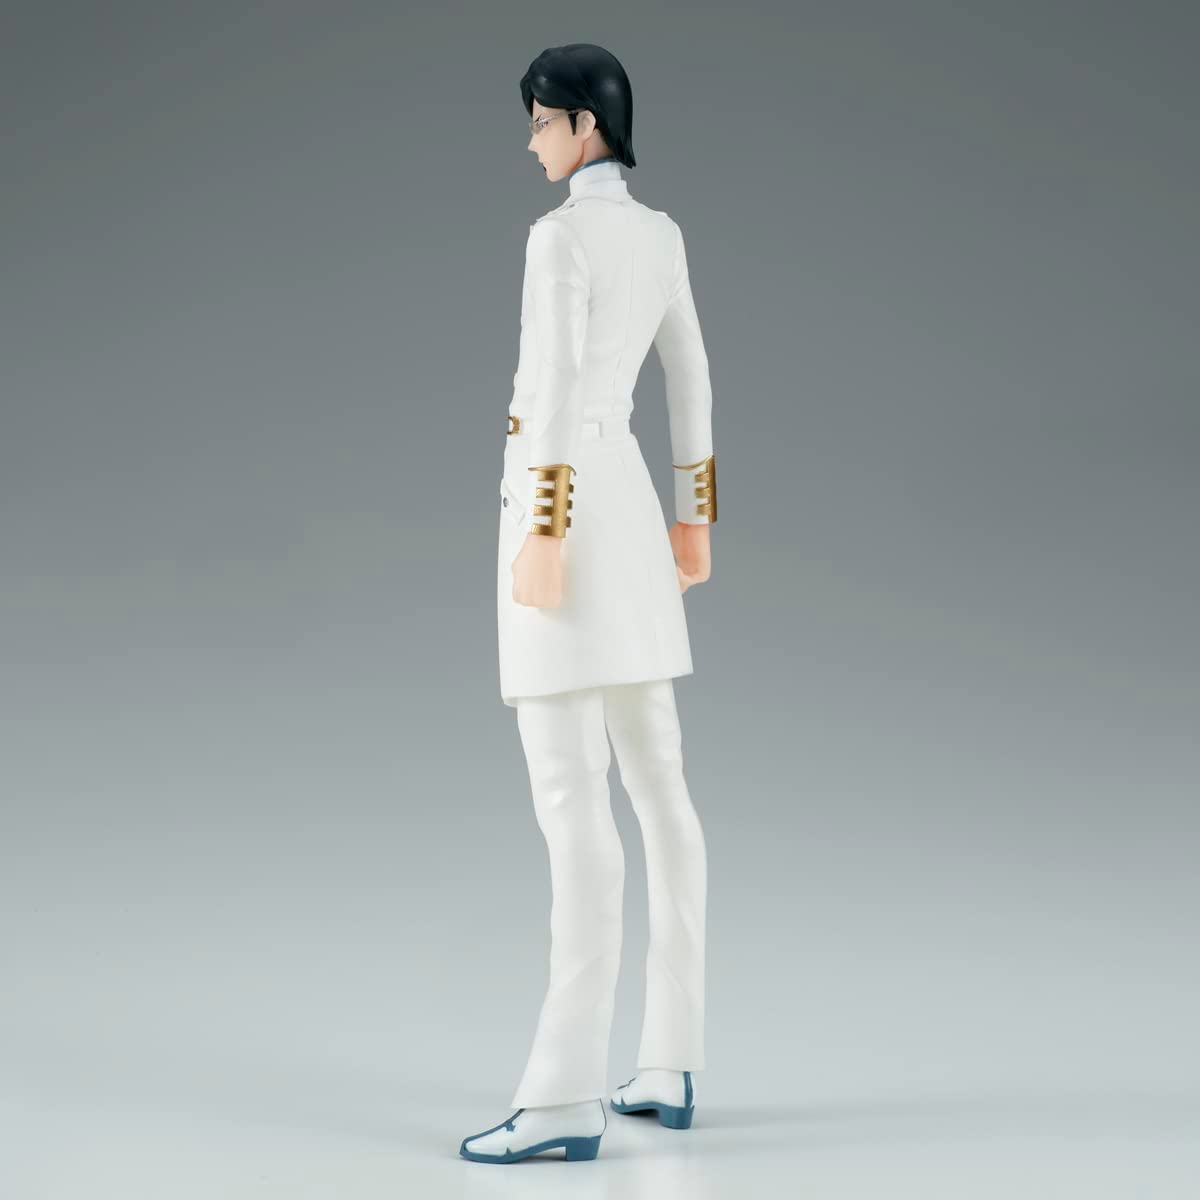 Load image into Gallery viewer, Uryu Ishida (Bleach) Solid and Souls Statue
